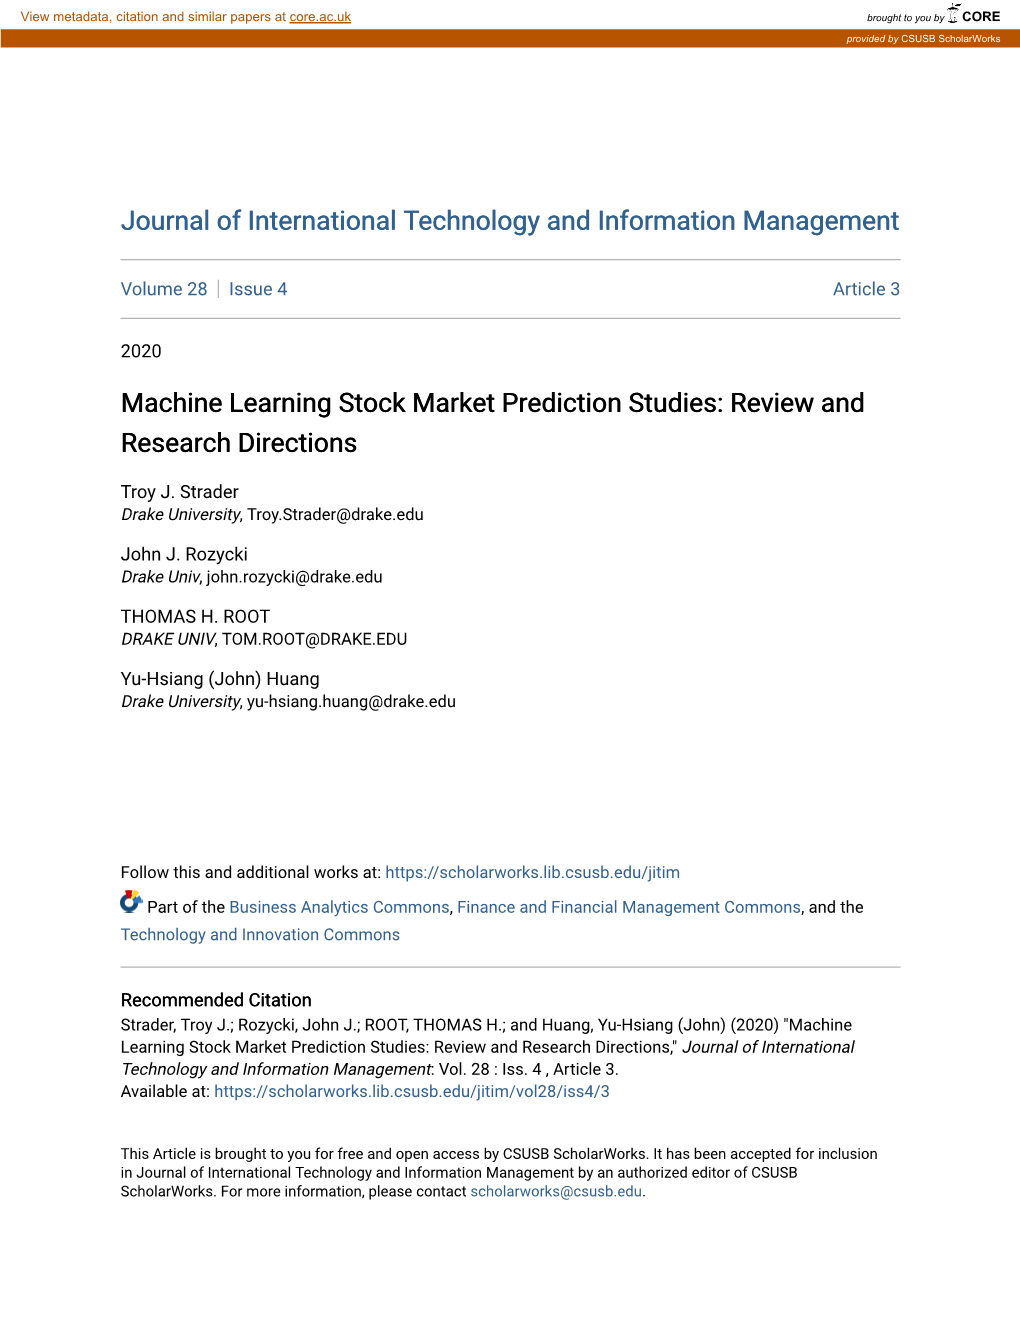 Machine Learning Stock Market Prediction Studies: Review and Research Directions